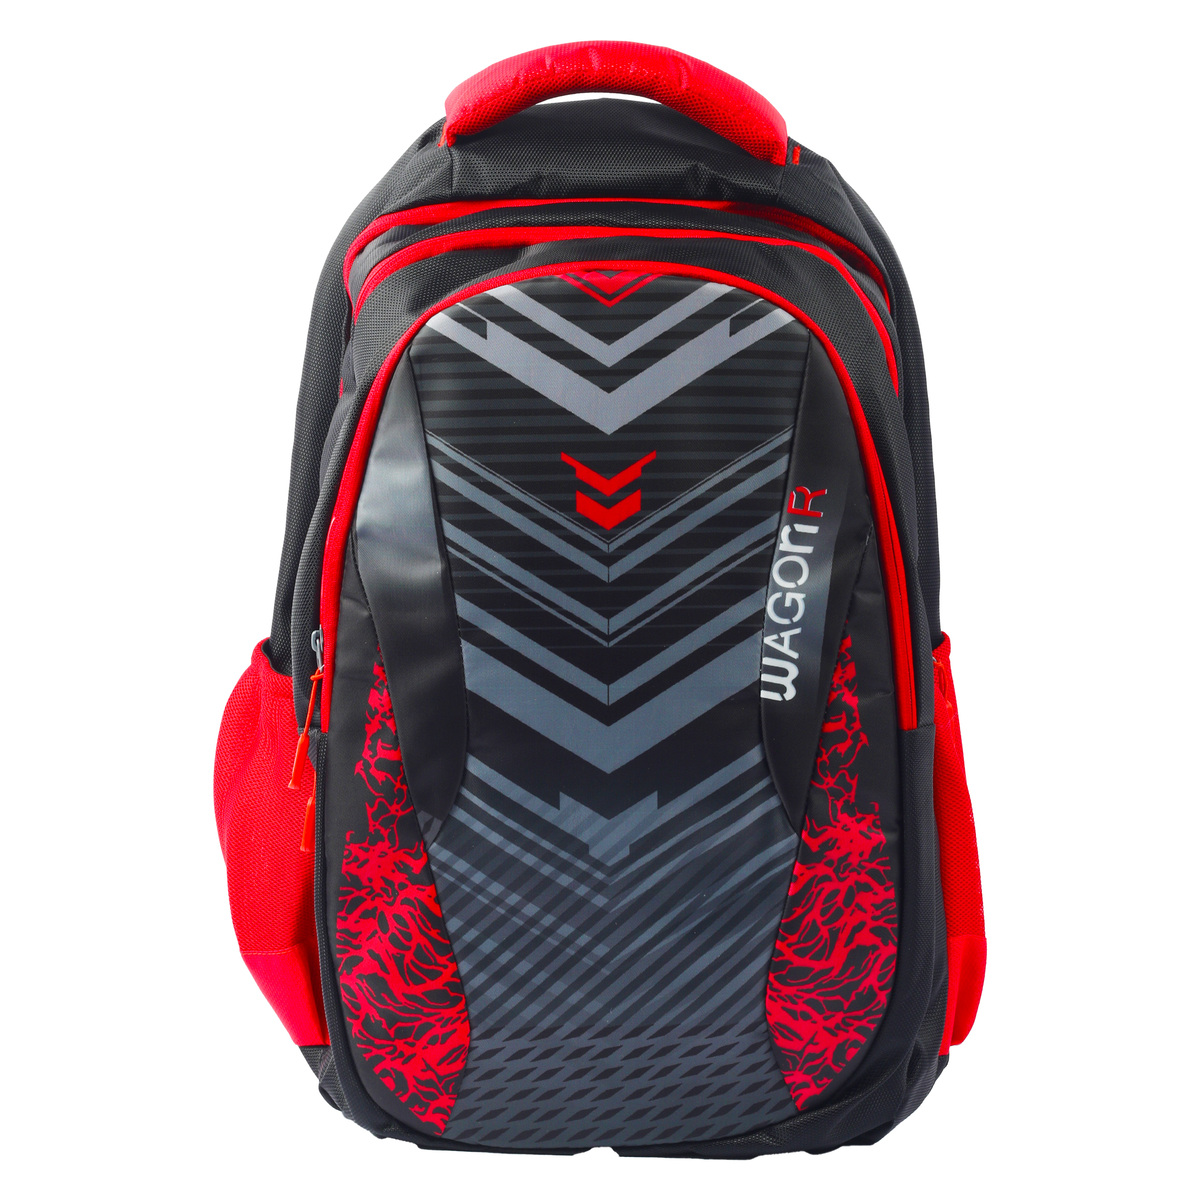 Wagon R Expedition Backpack 3905 19" Assorted